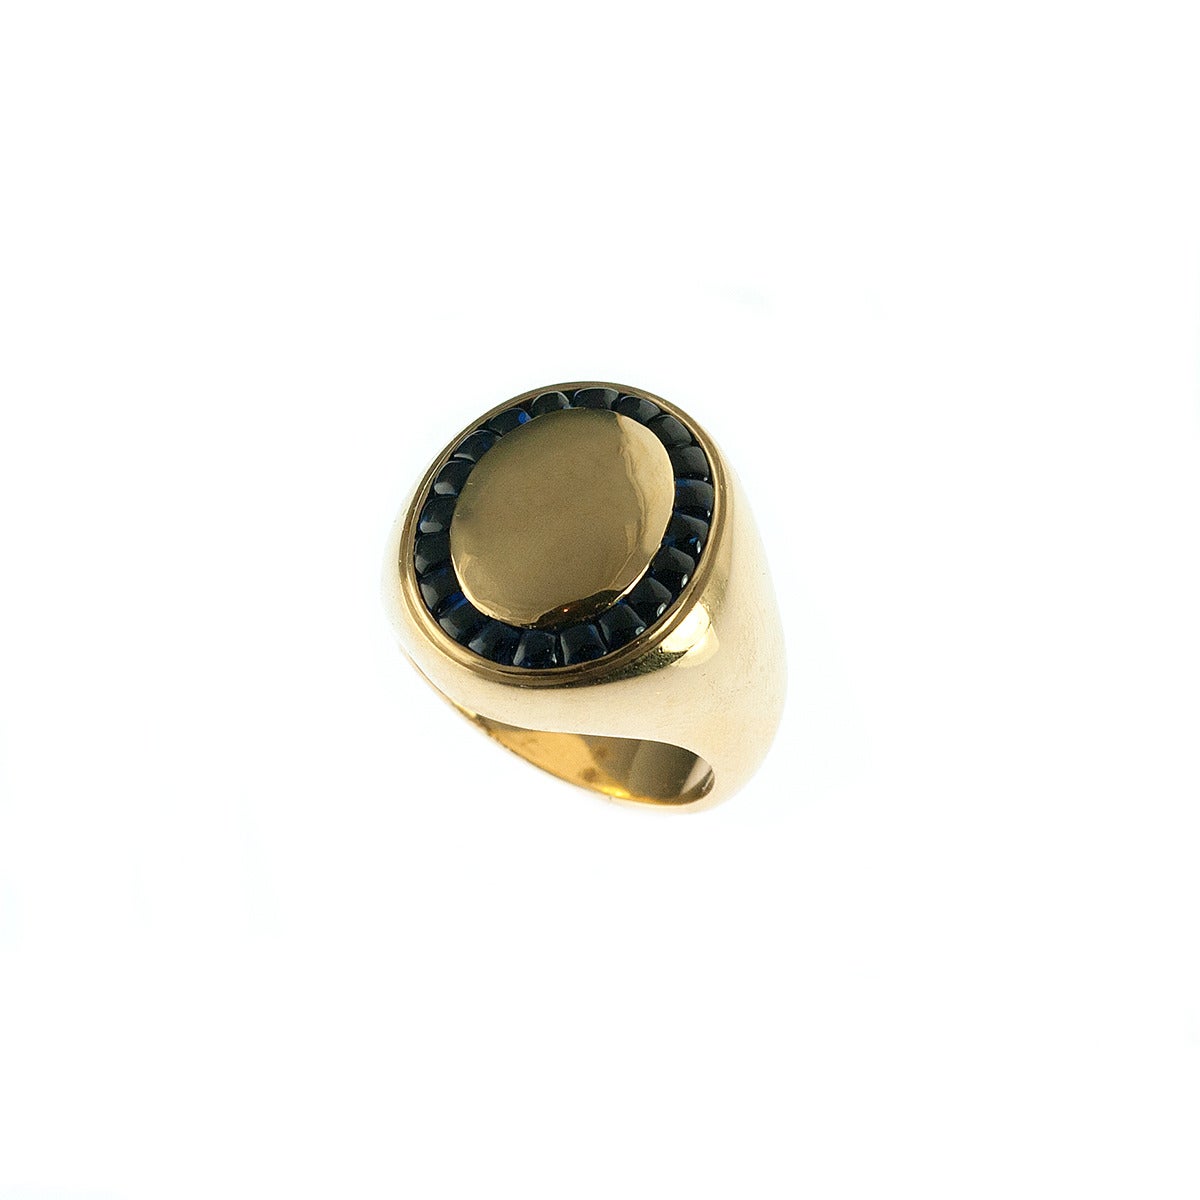 A handsome gold and sapphire men's ring by Deakin & Francis. The 1